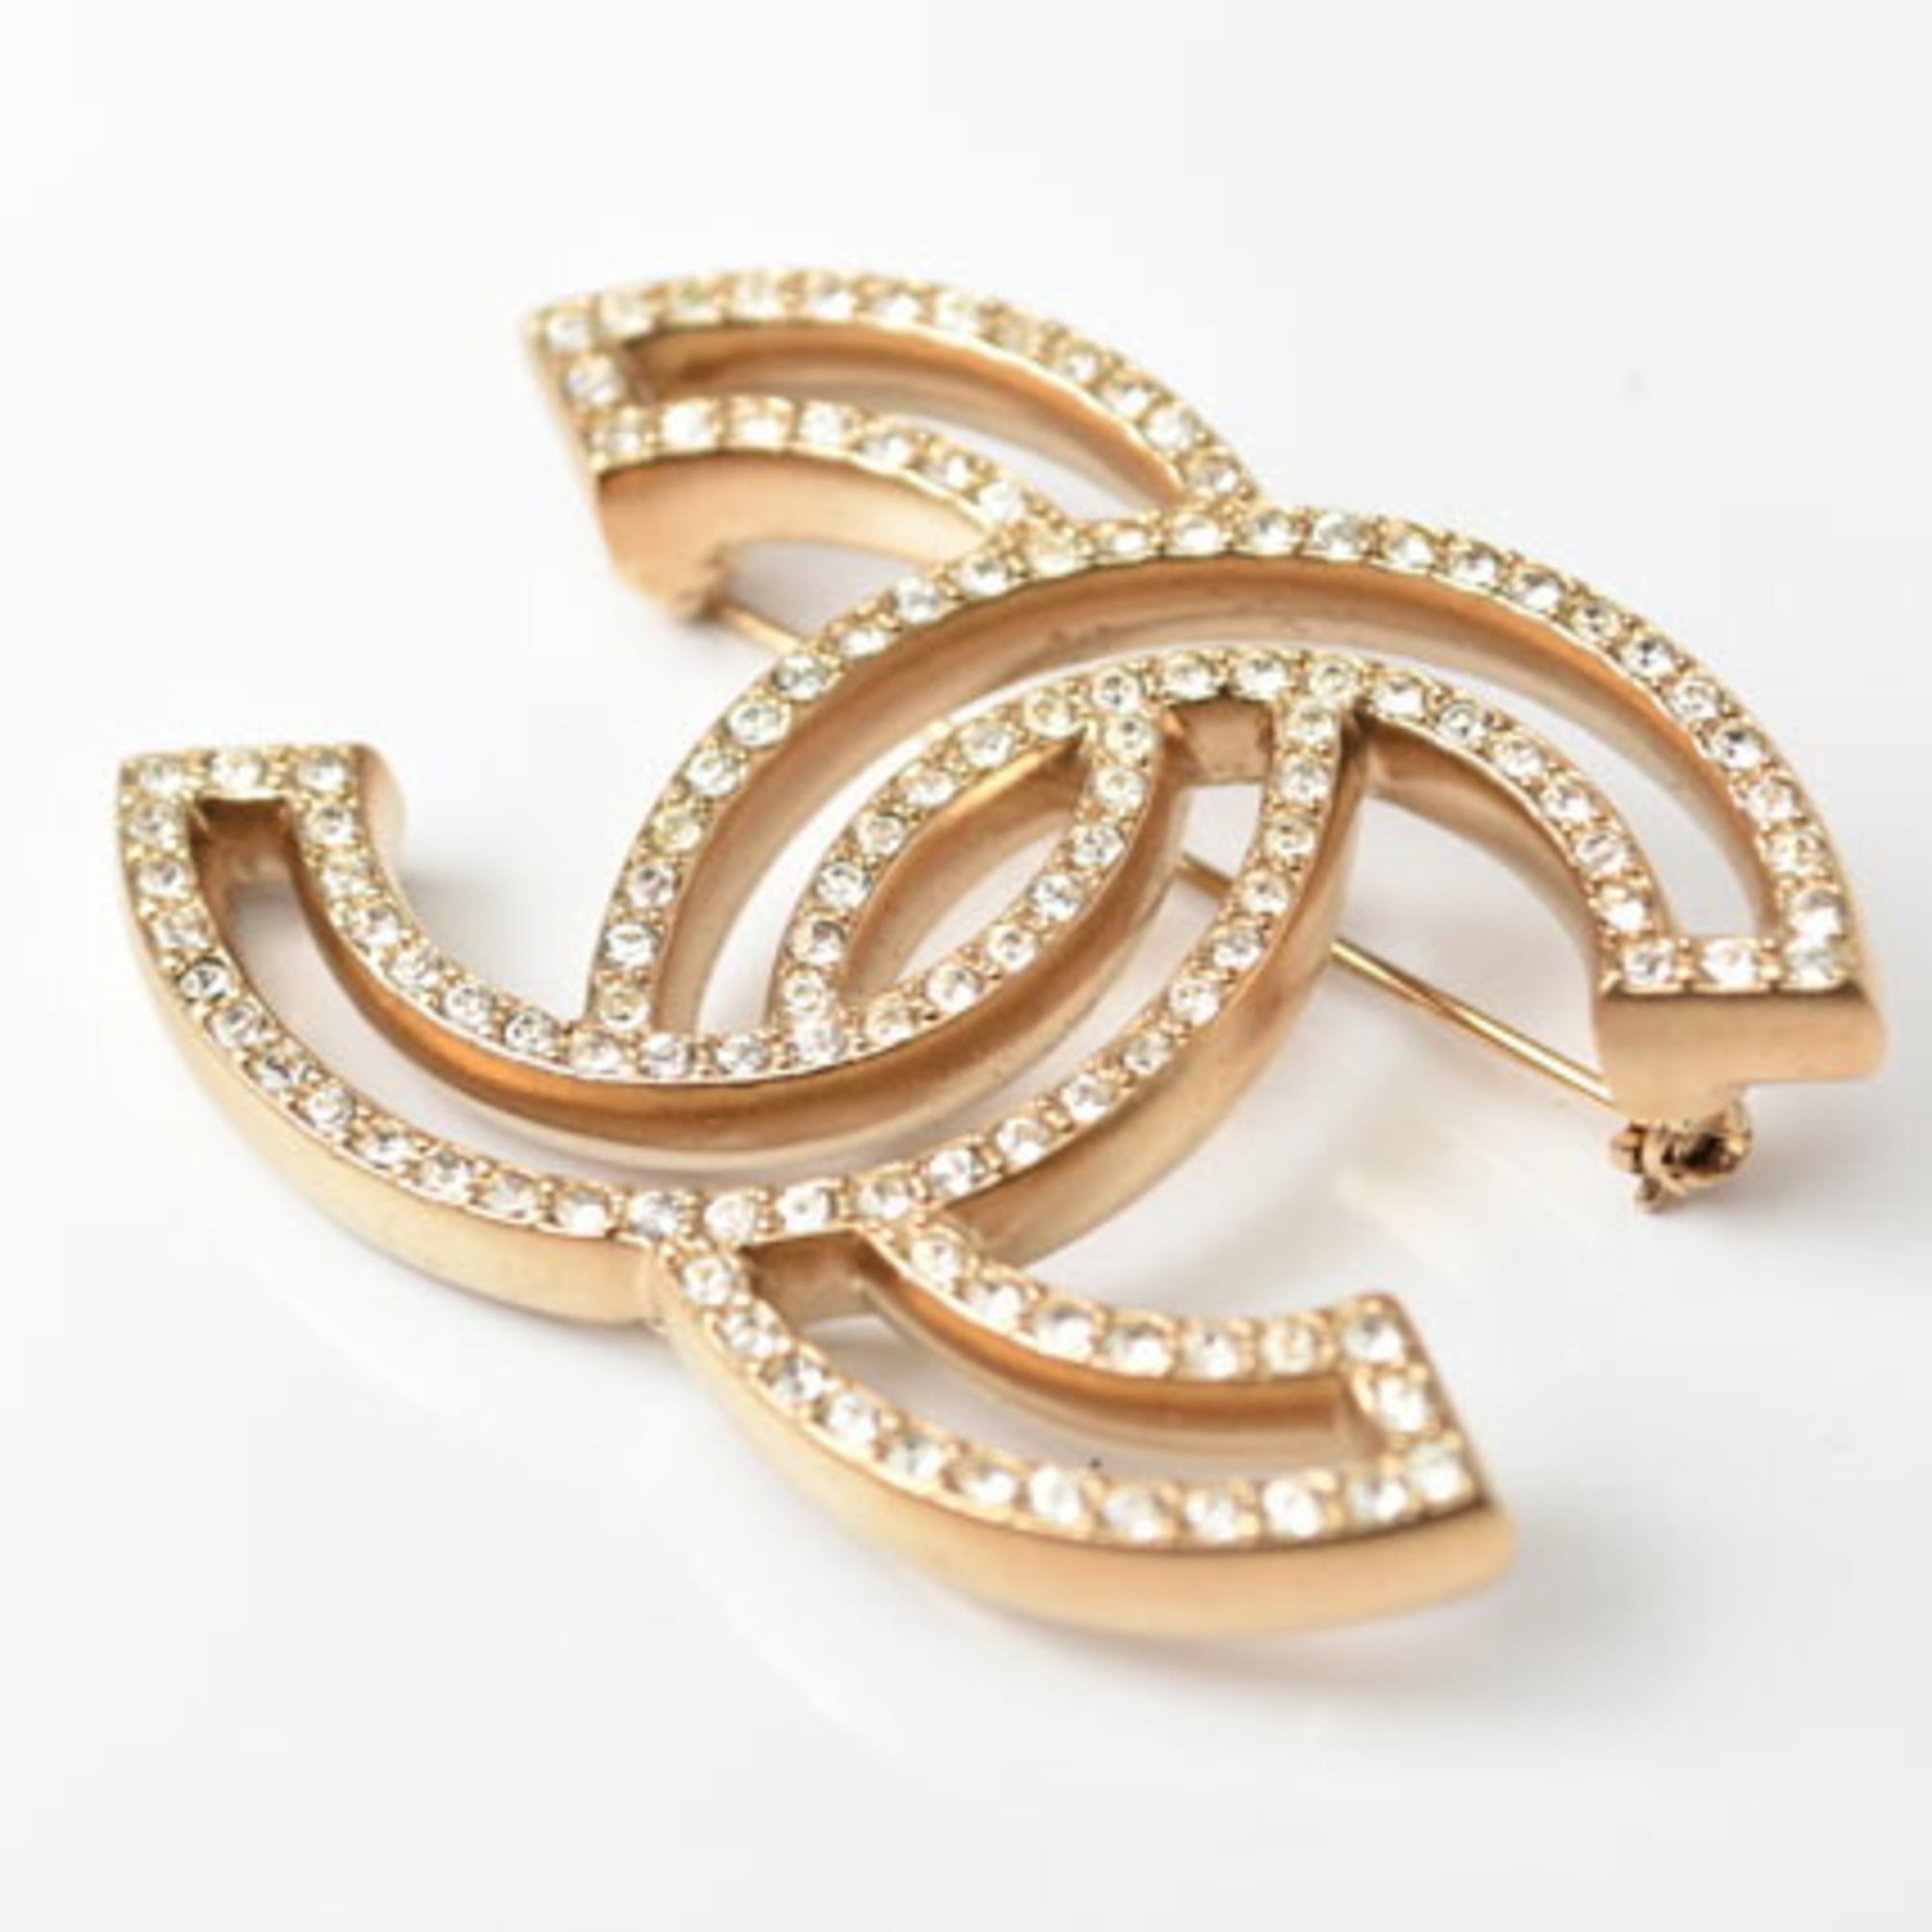 chanel 5 brooch pins for women